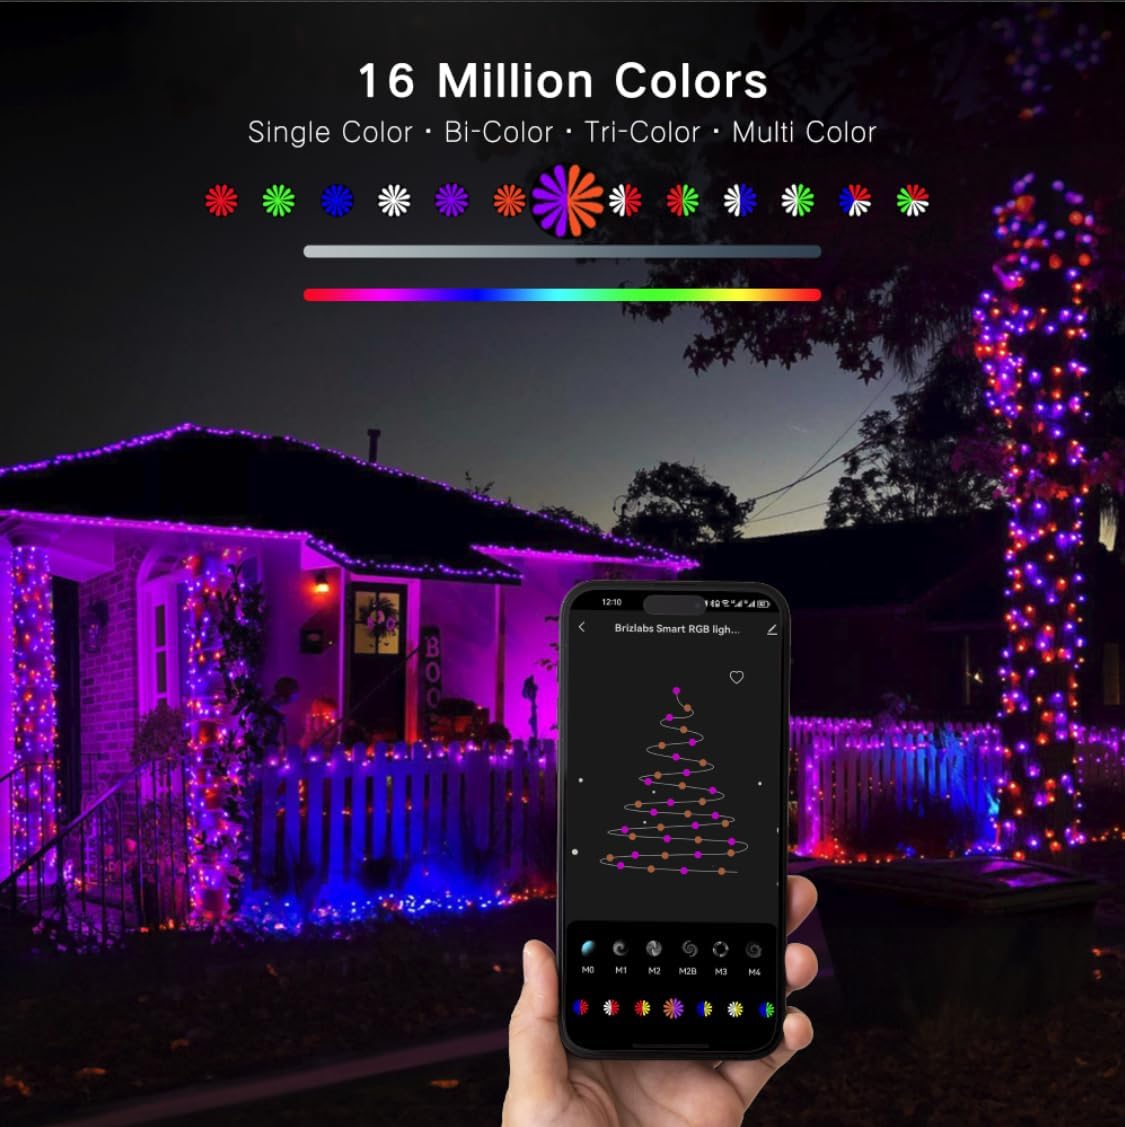 BrizLabs Smart Christmas Lights, 261ft 798 LED WiFi String Lights App Control, Dimmable Color Changing Christmas Lights, RGB Xmas Tree Lights Work with Alexa Google Home for Outdoor Indoor Party Decor